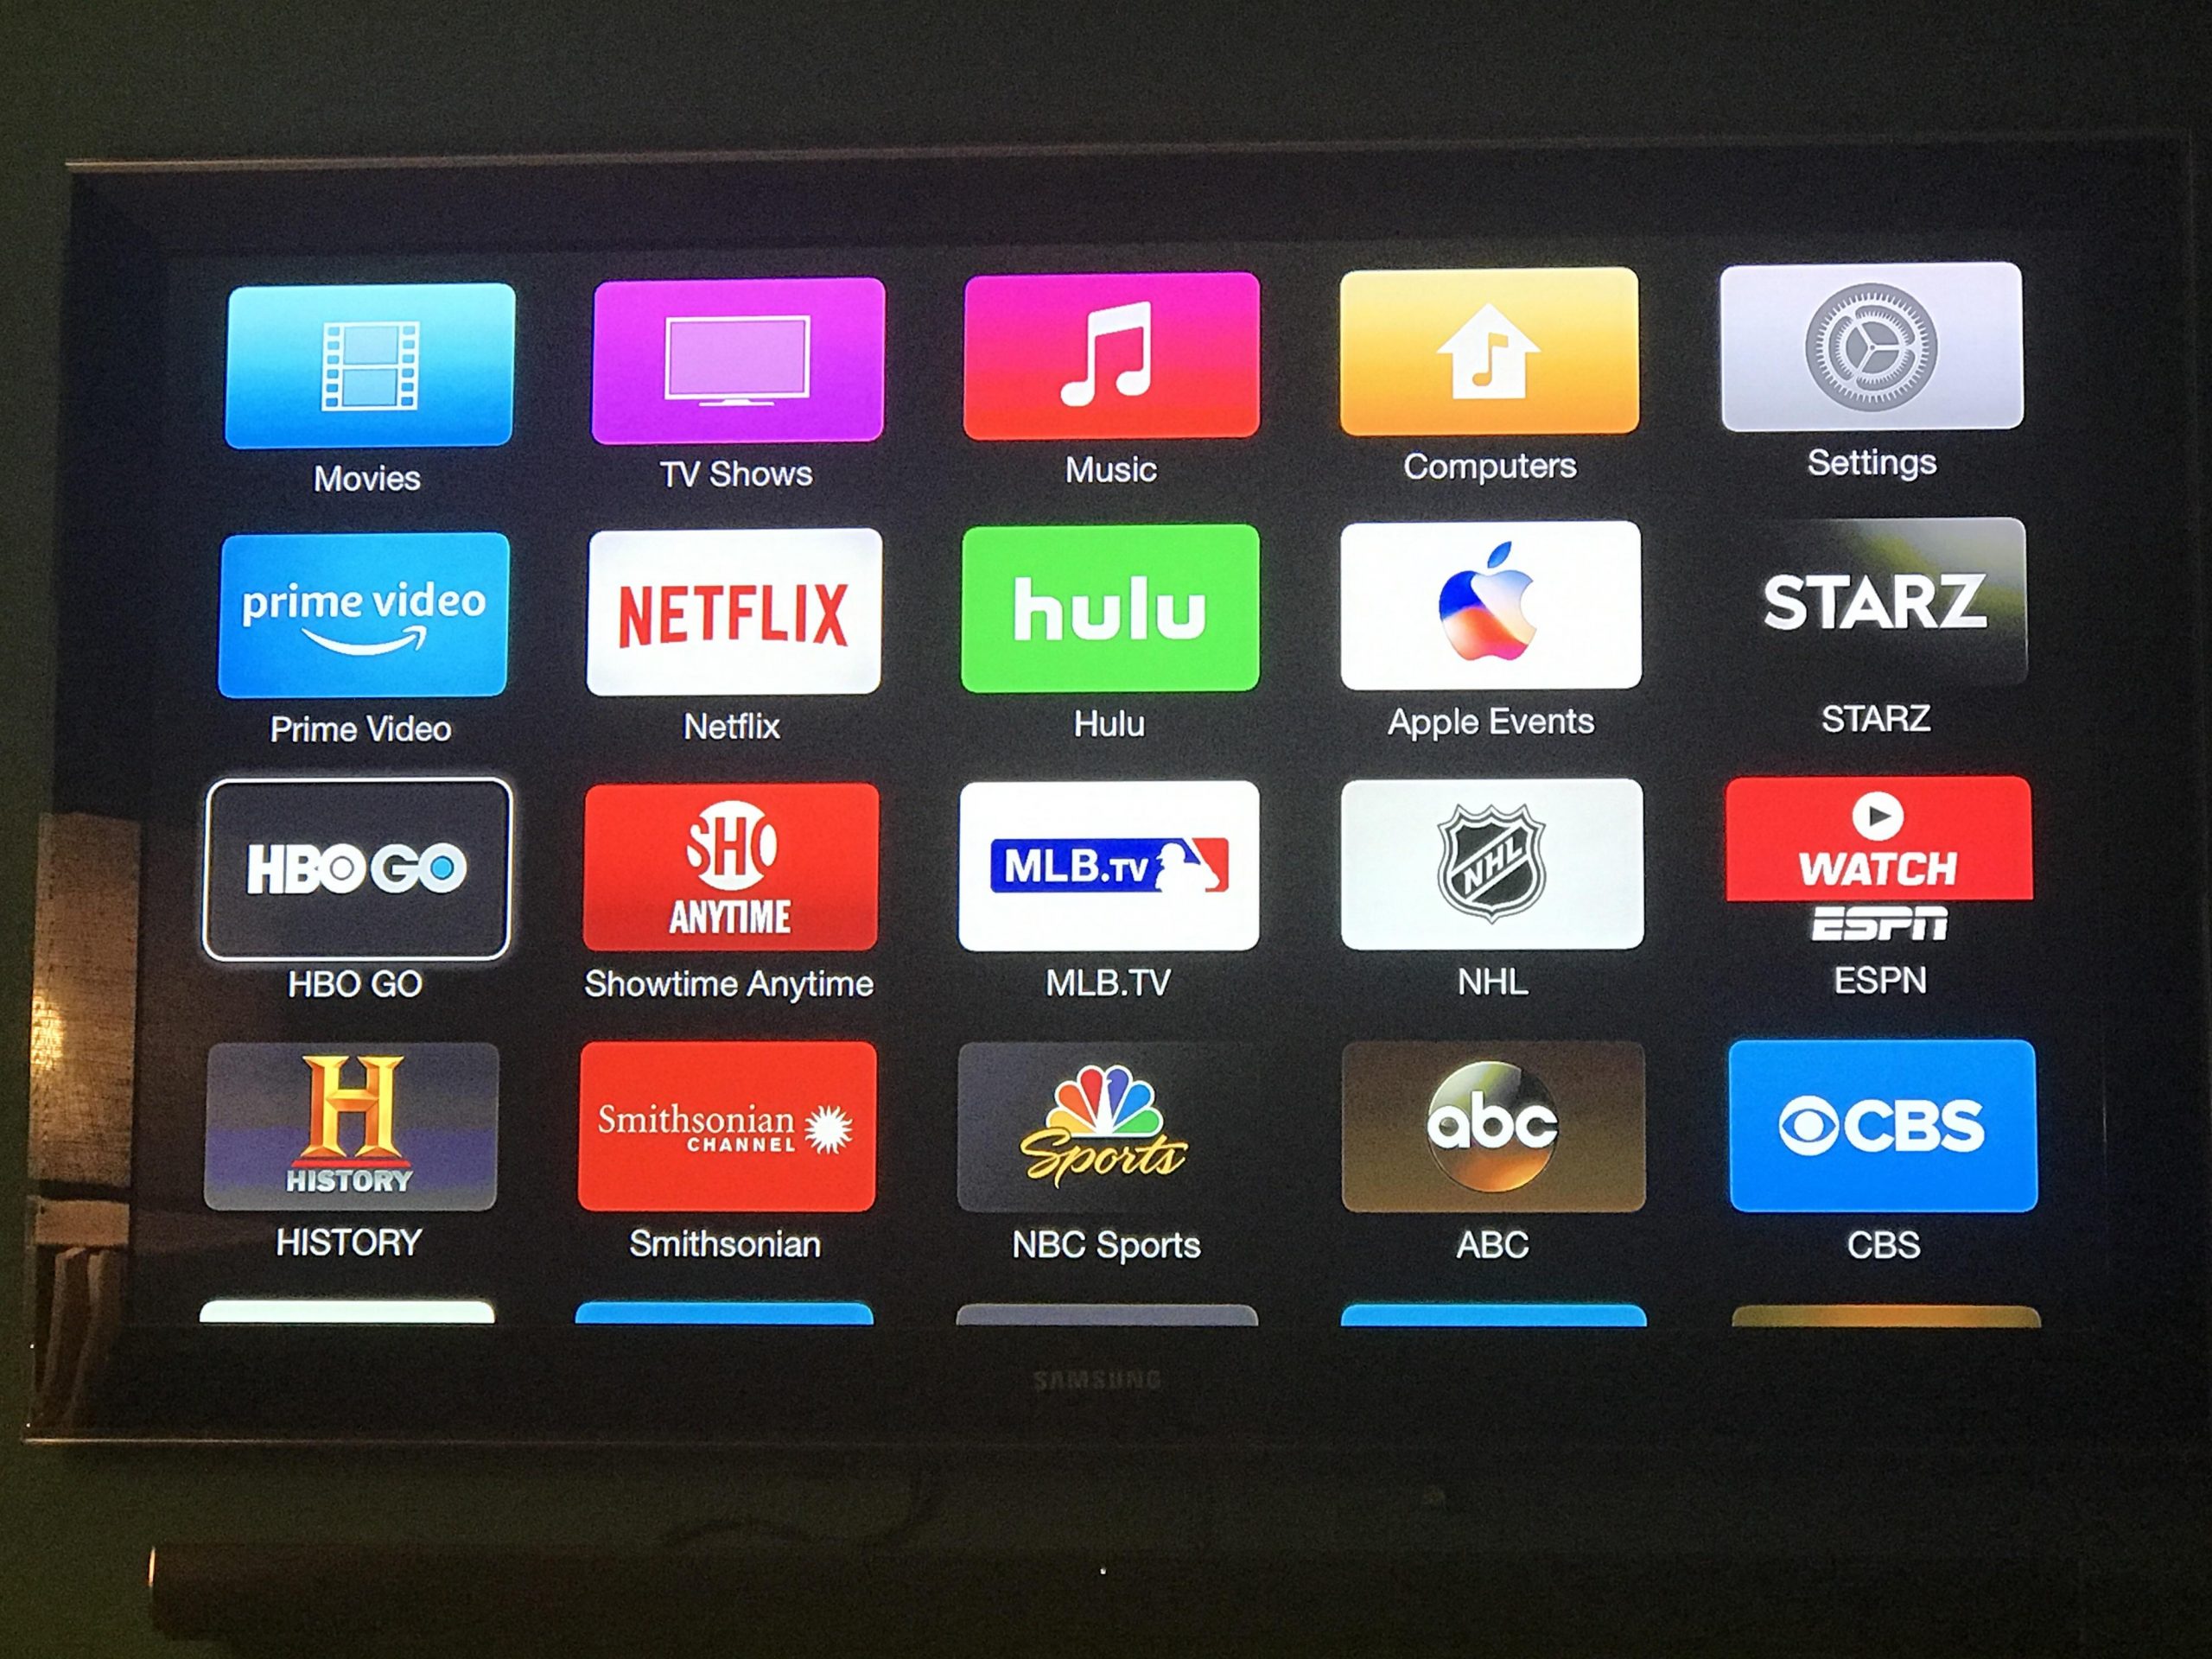 How Do I Add Hbo Go To My Apple TV